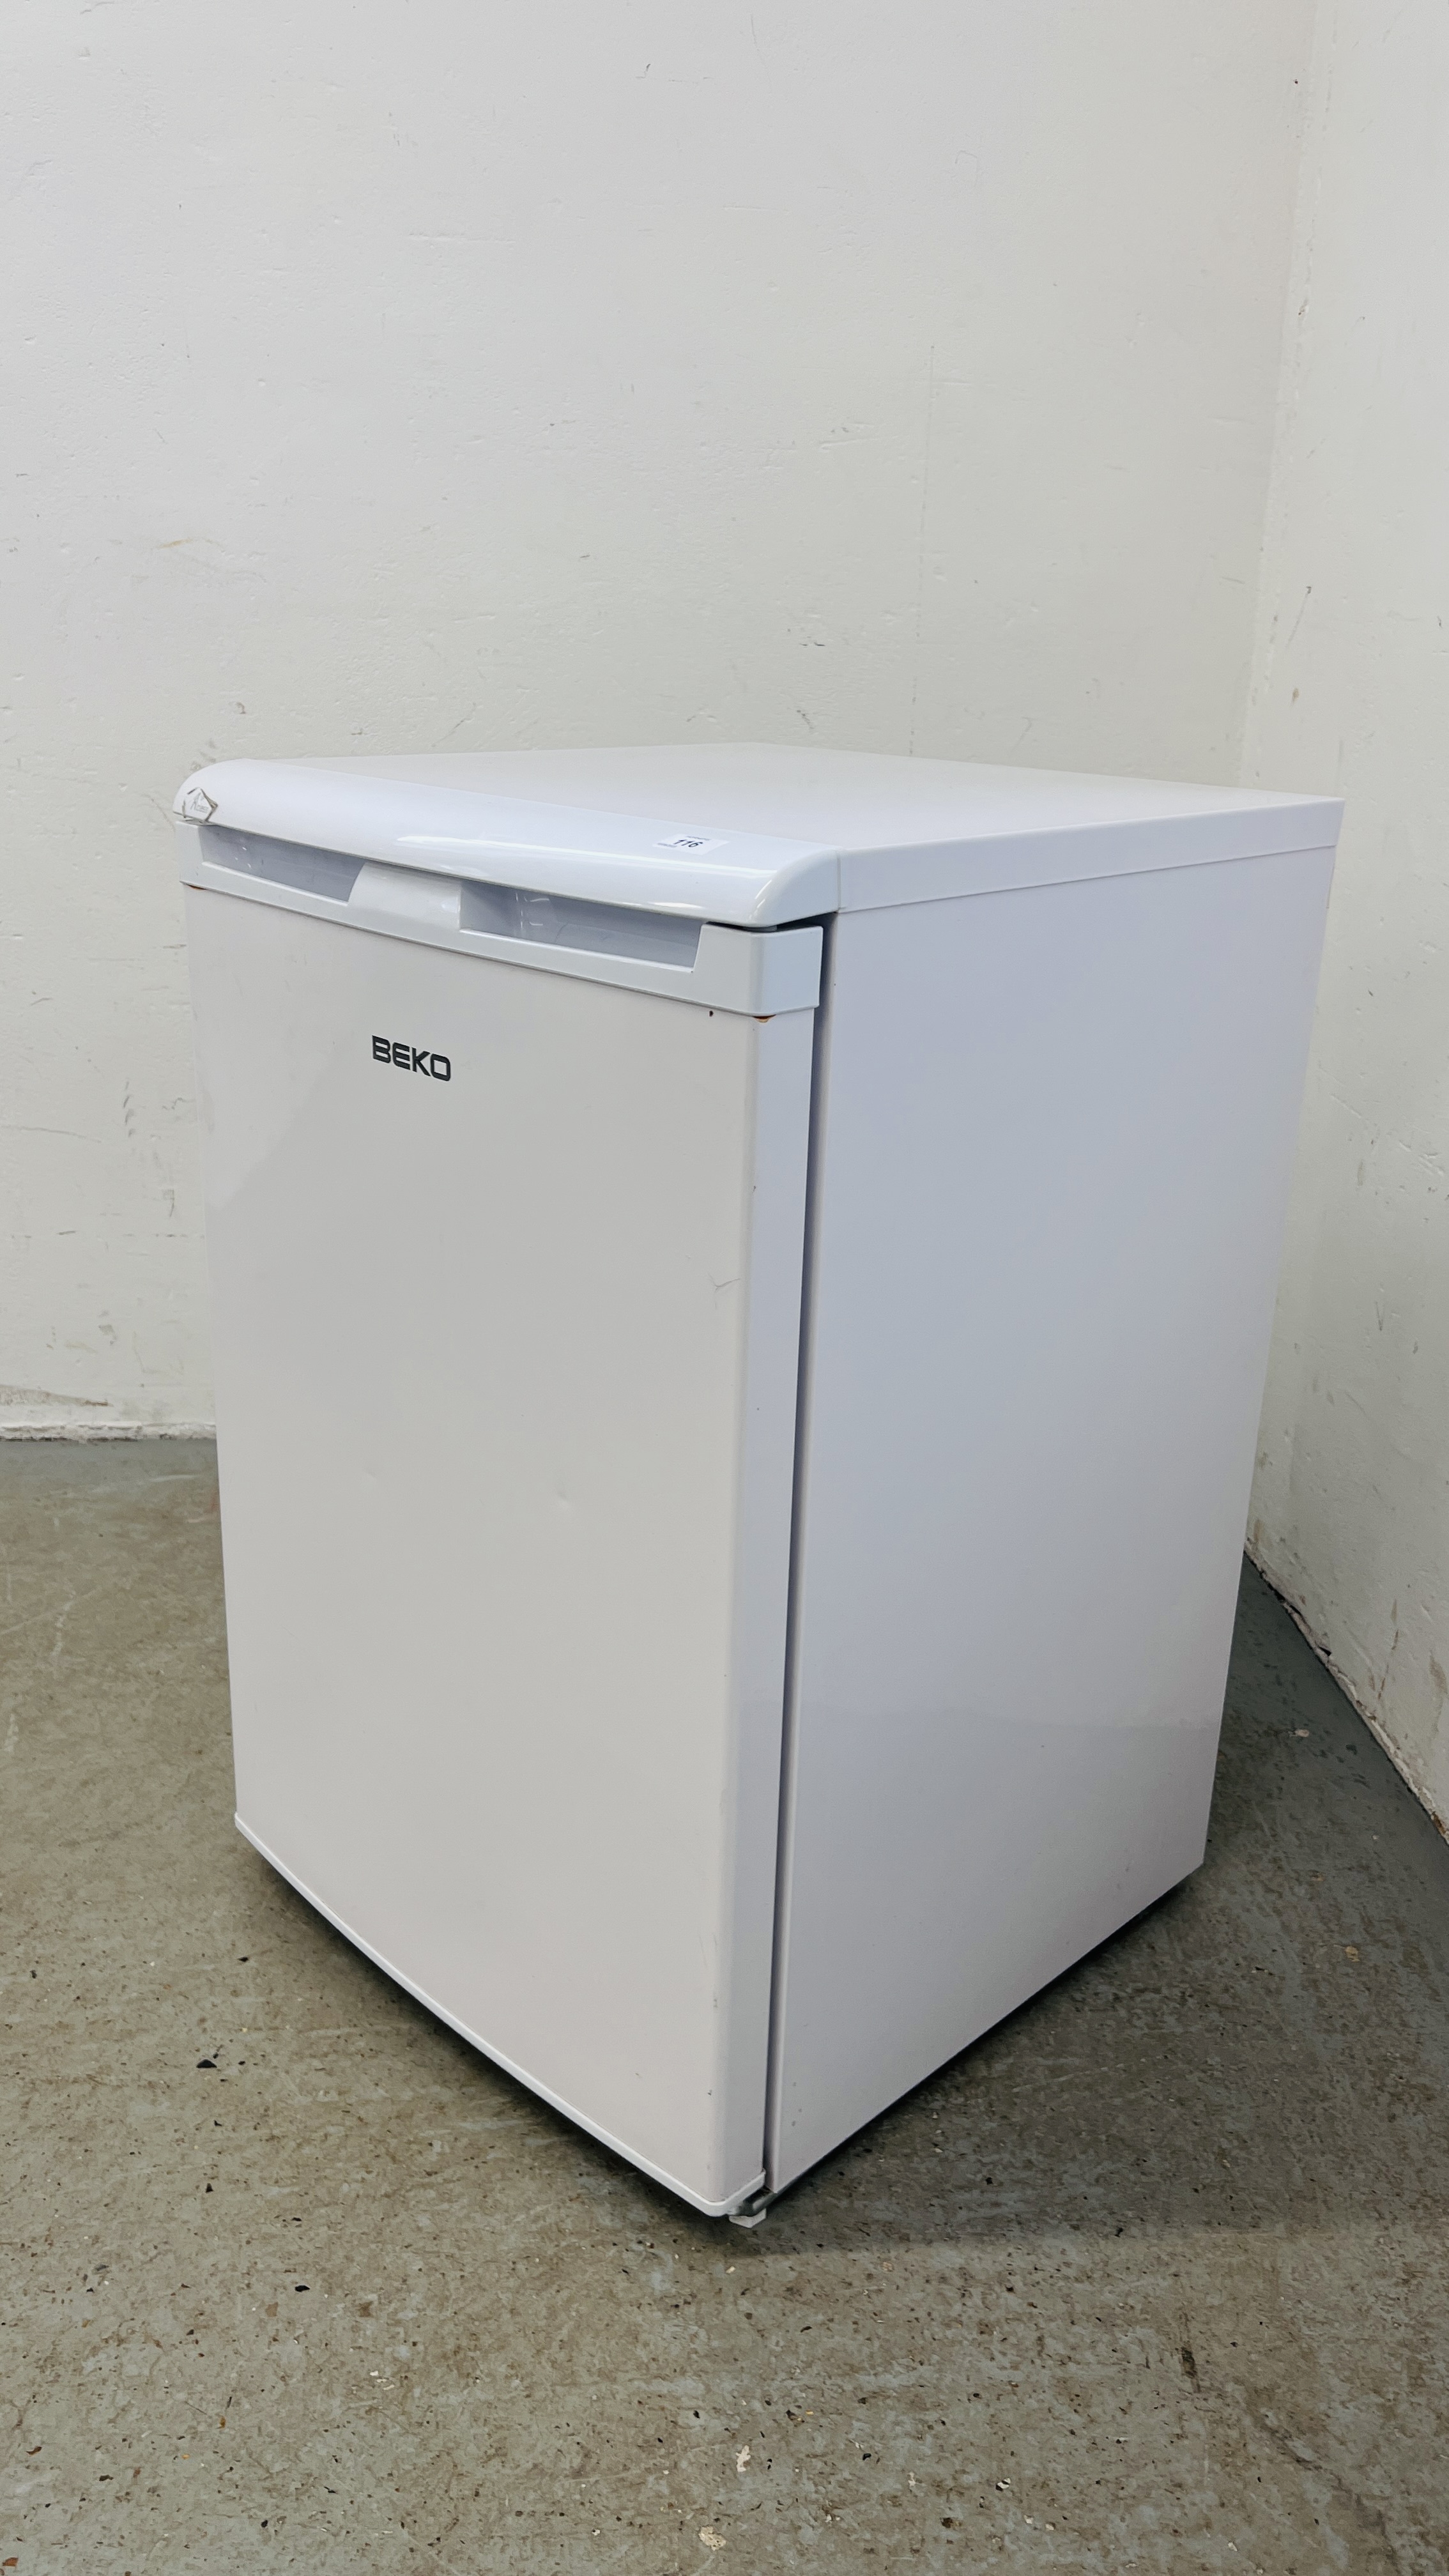 A BEKO UNDERCOUNTER FREEZER - SOLD AS SEEN. - Image 3 of 5